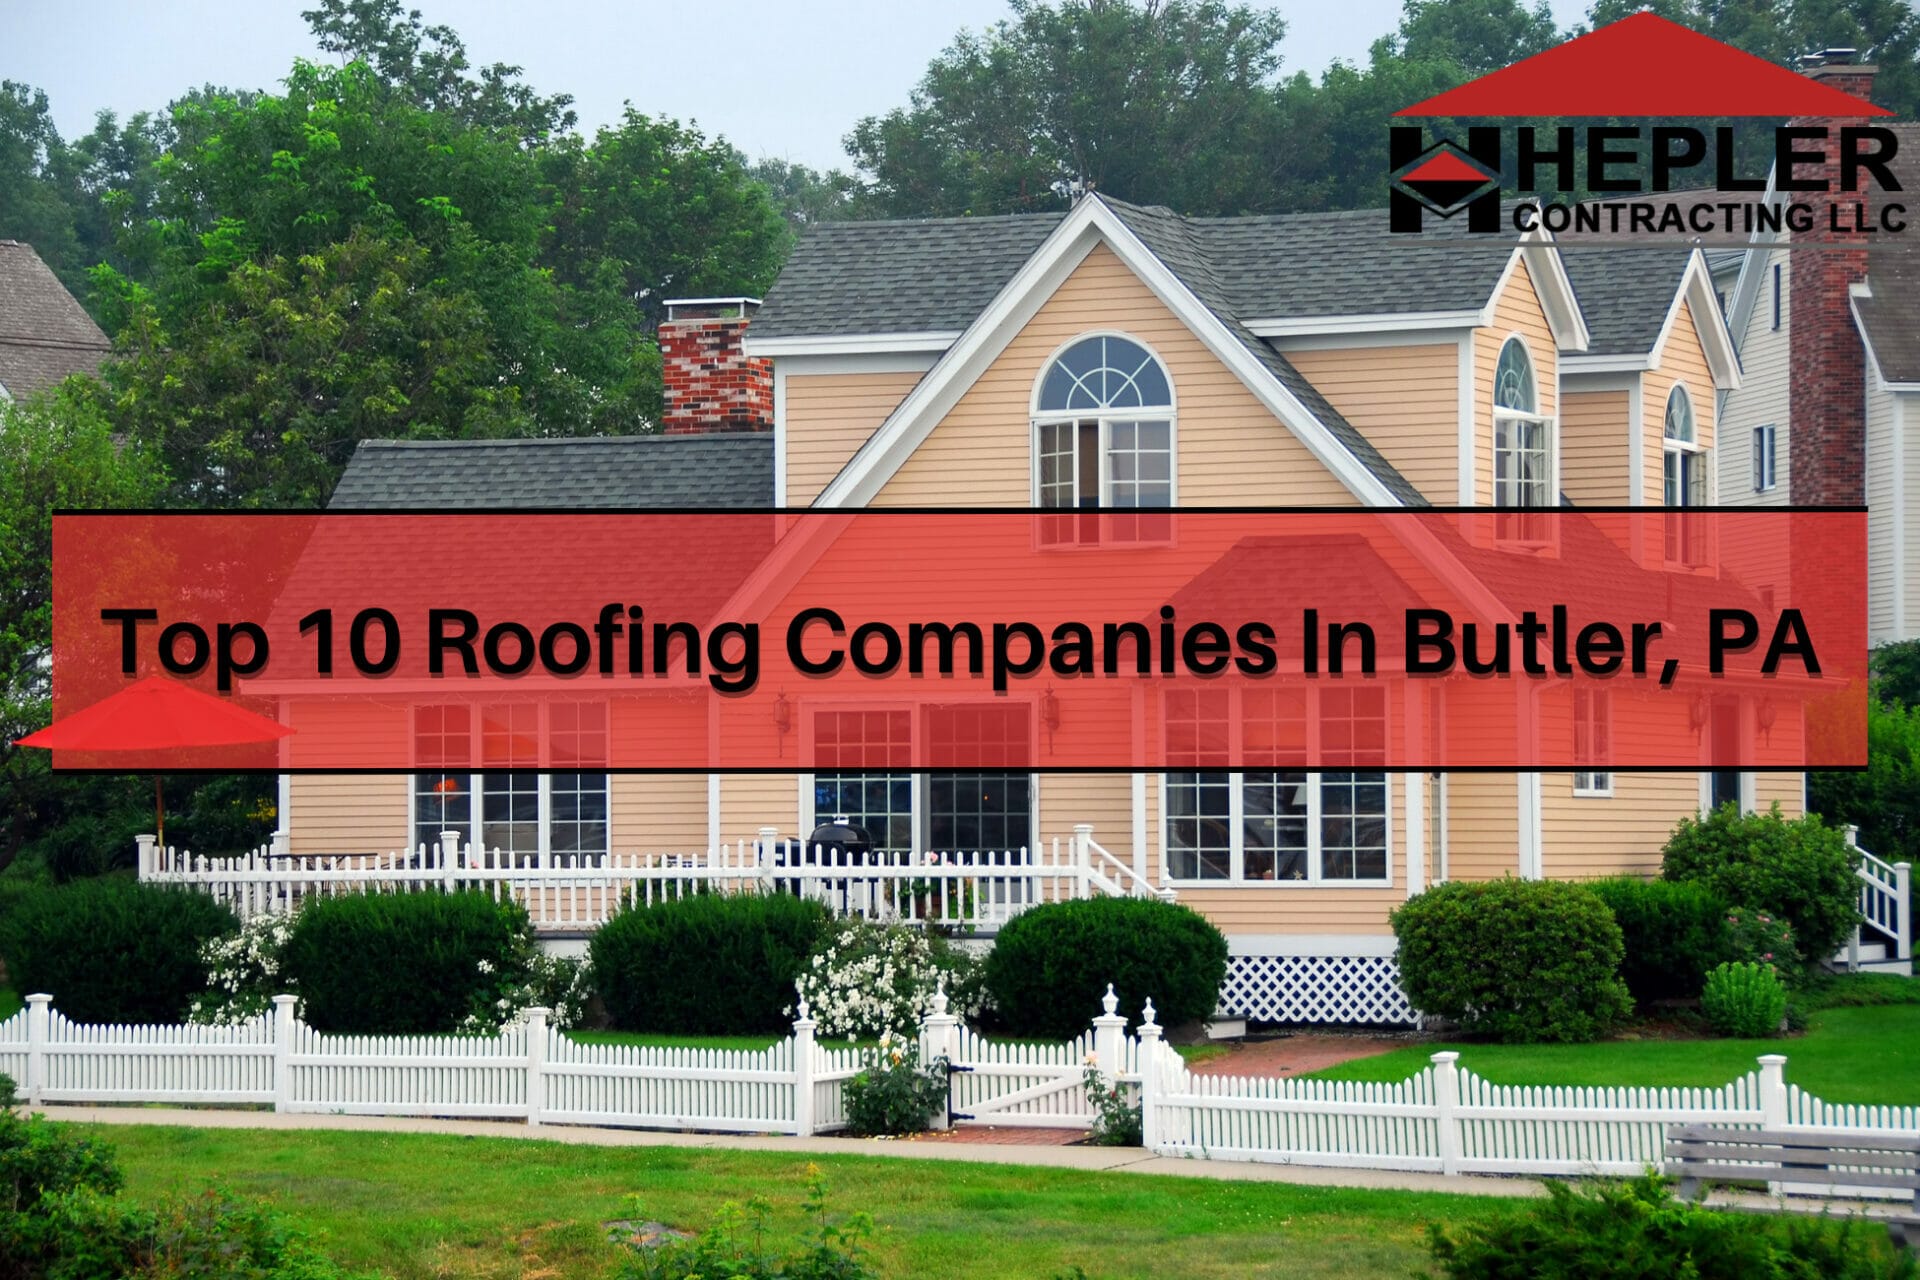 Top 10 Roofing Companies In Butler, PA